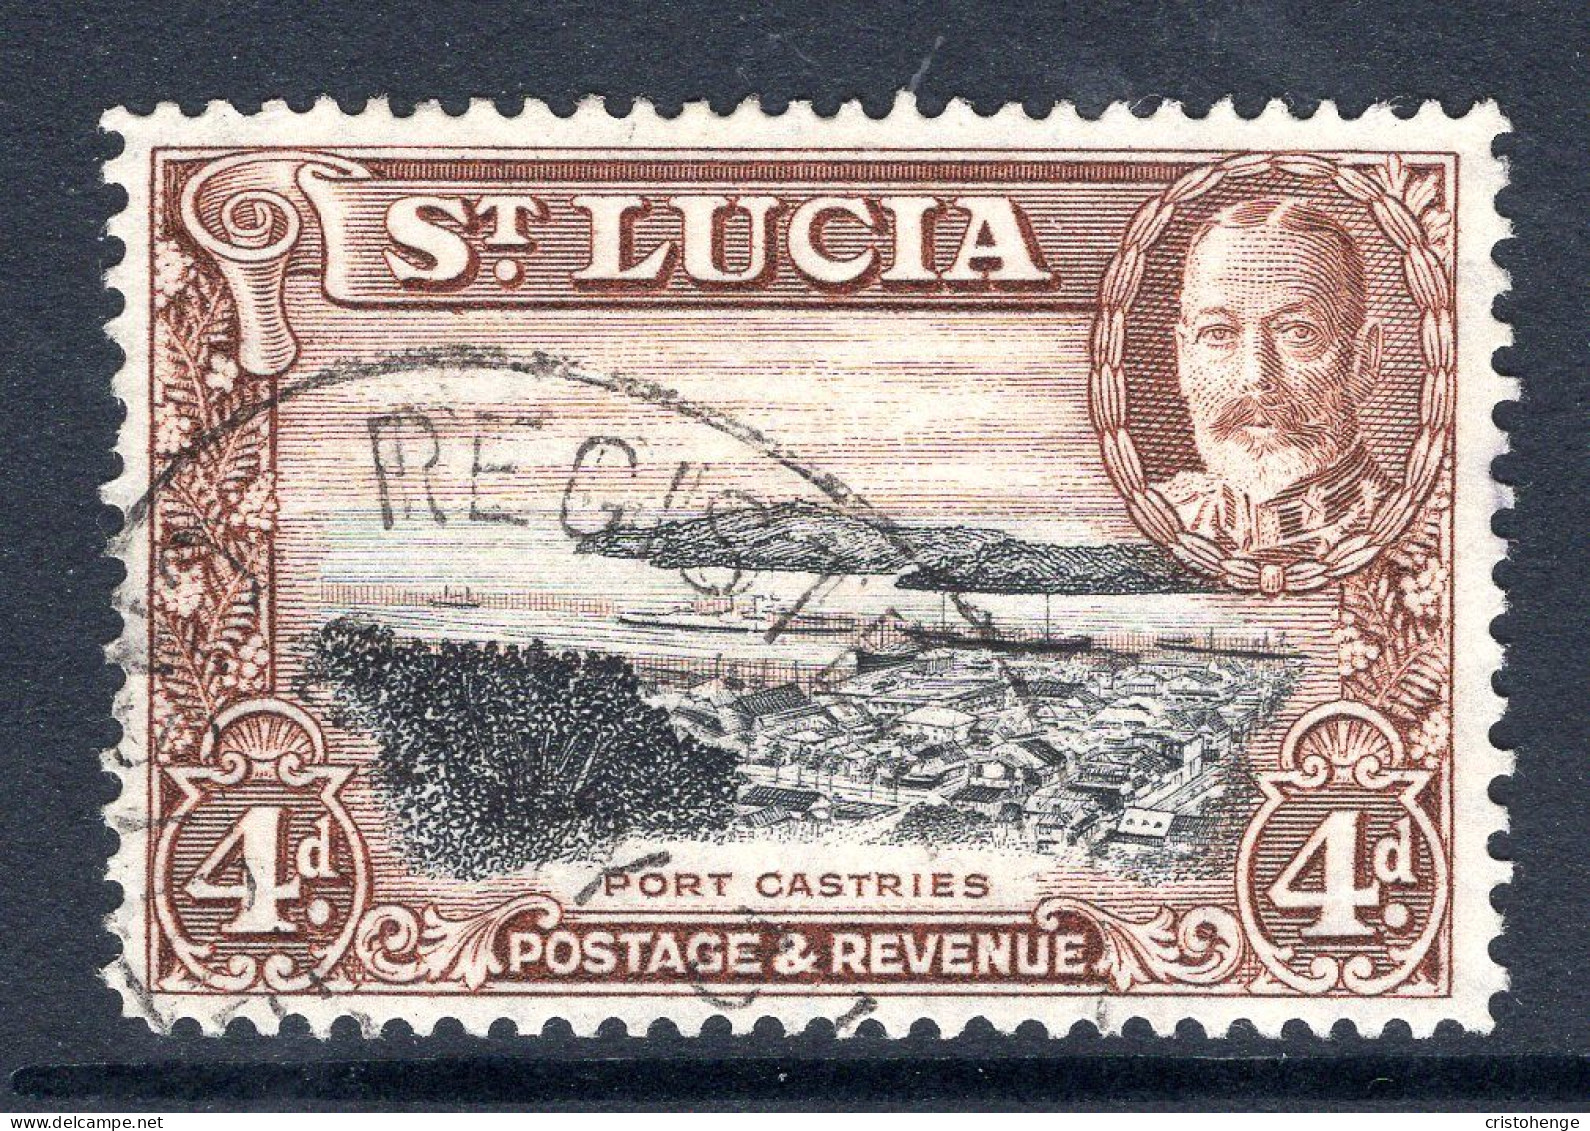 St Lucia 1936 KGV Pictorials - P.14 - 4d Port Castries Used (SG 119) - St.Lucia (...-1978)